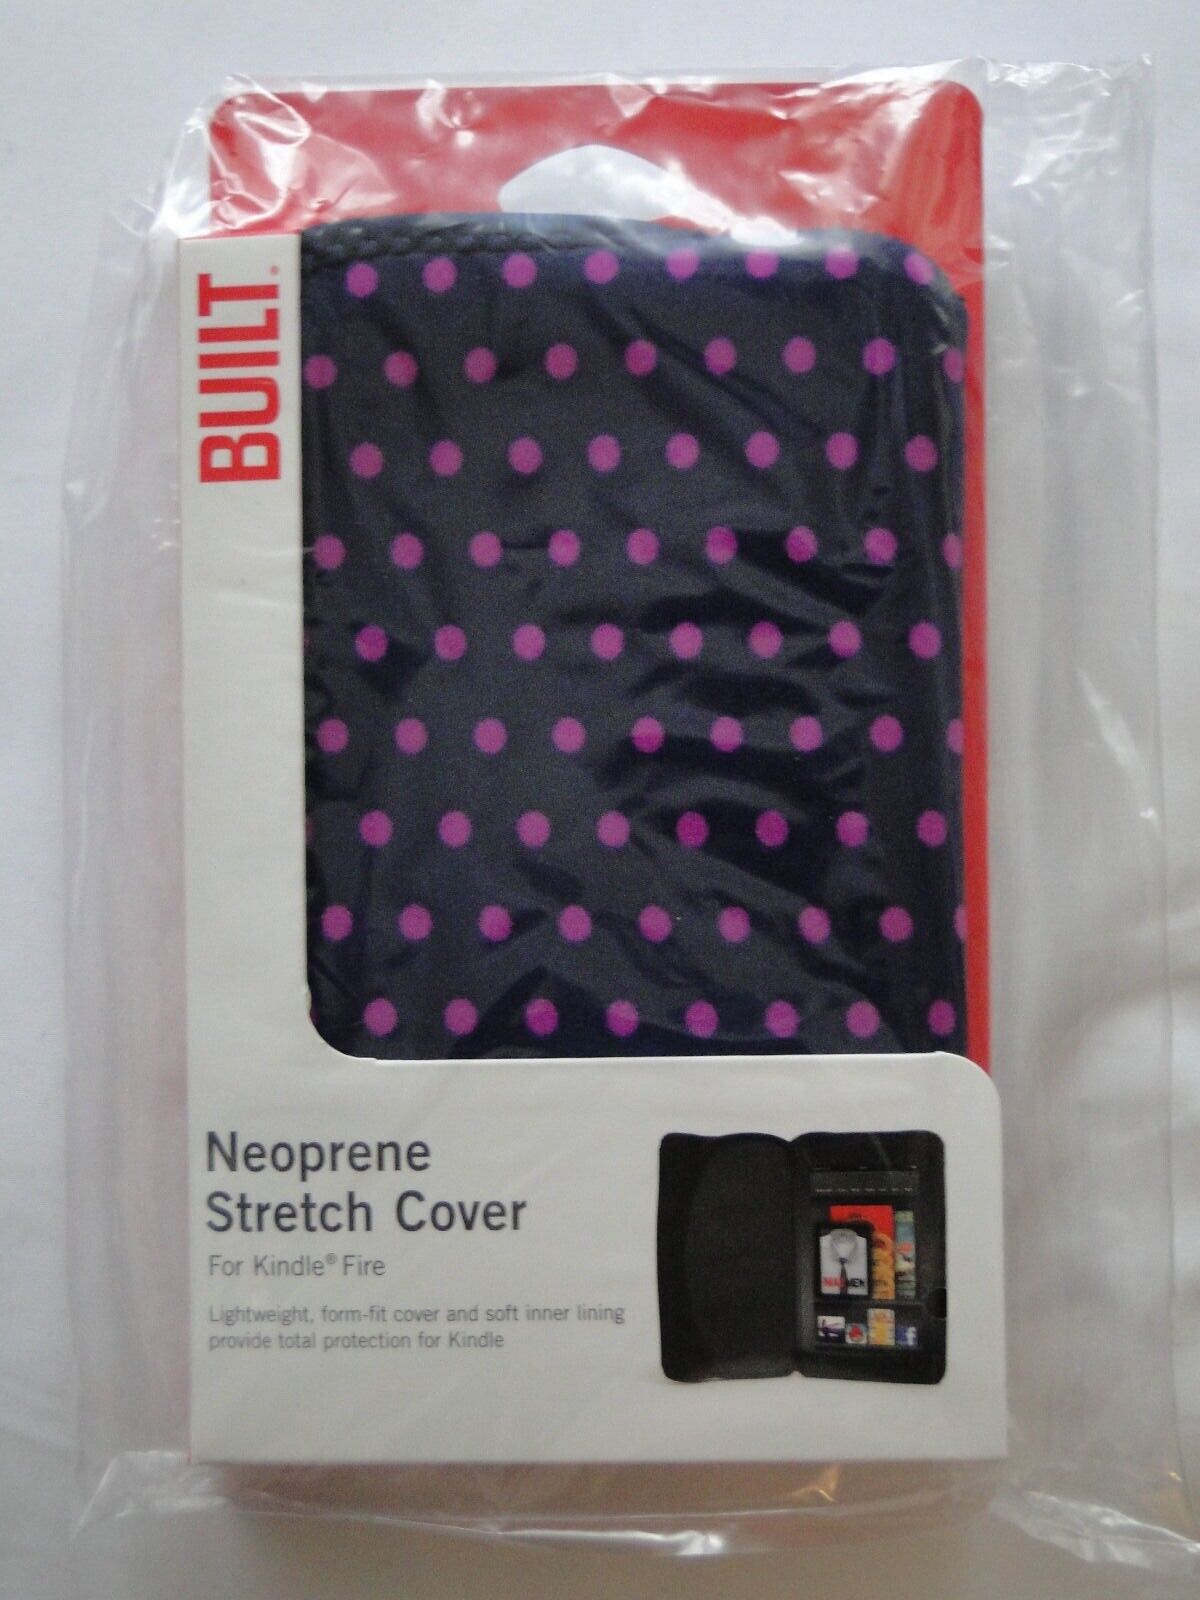 BUILT Neoprene Stretch Cover Case for Kindle Fire - Mini Dot Navy Blue Hot Pink